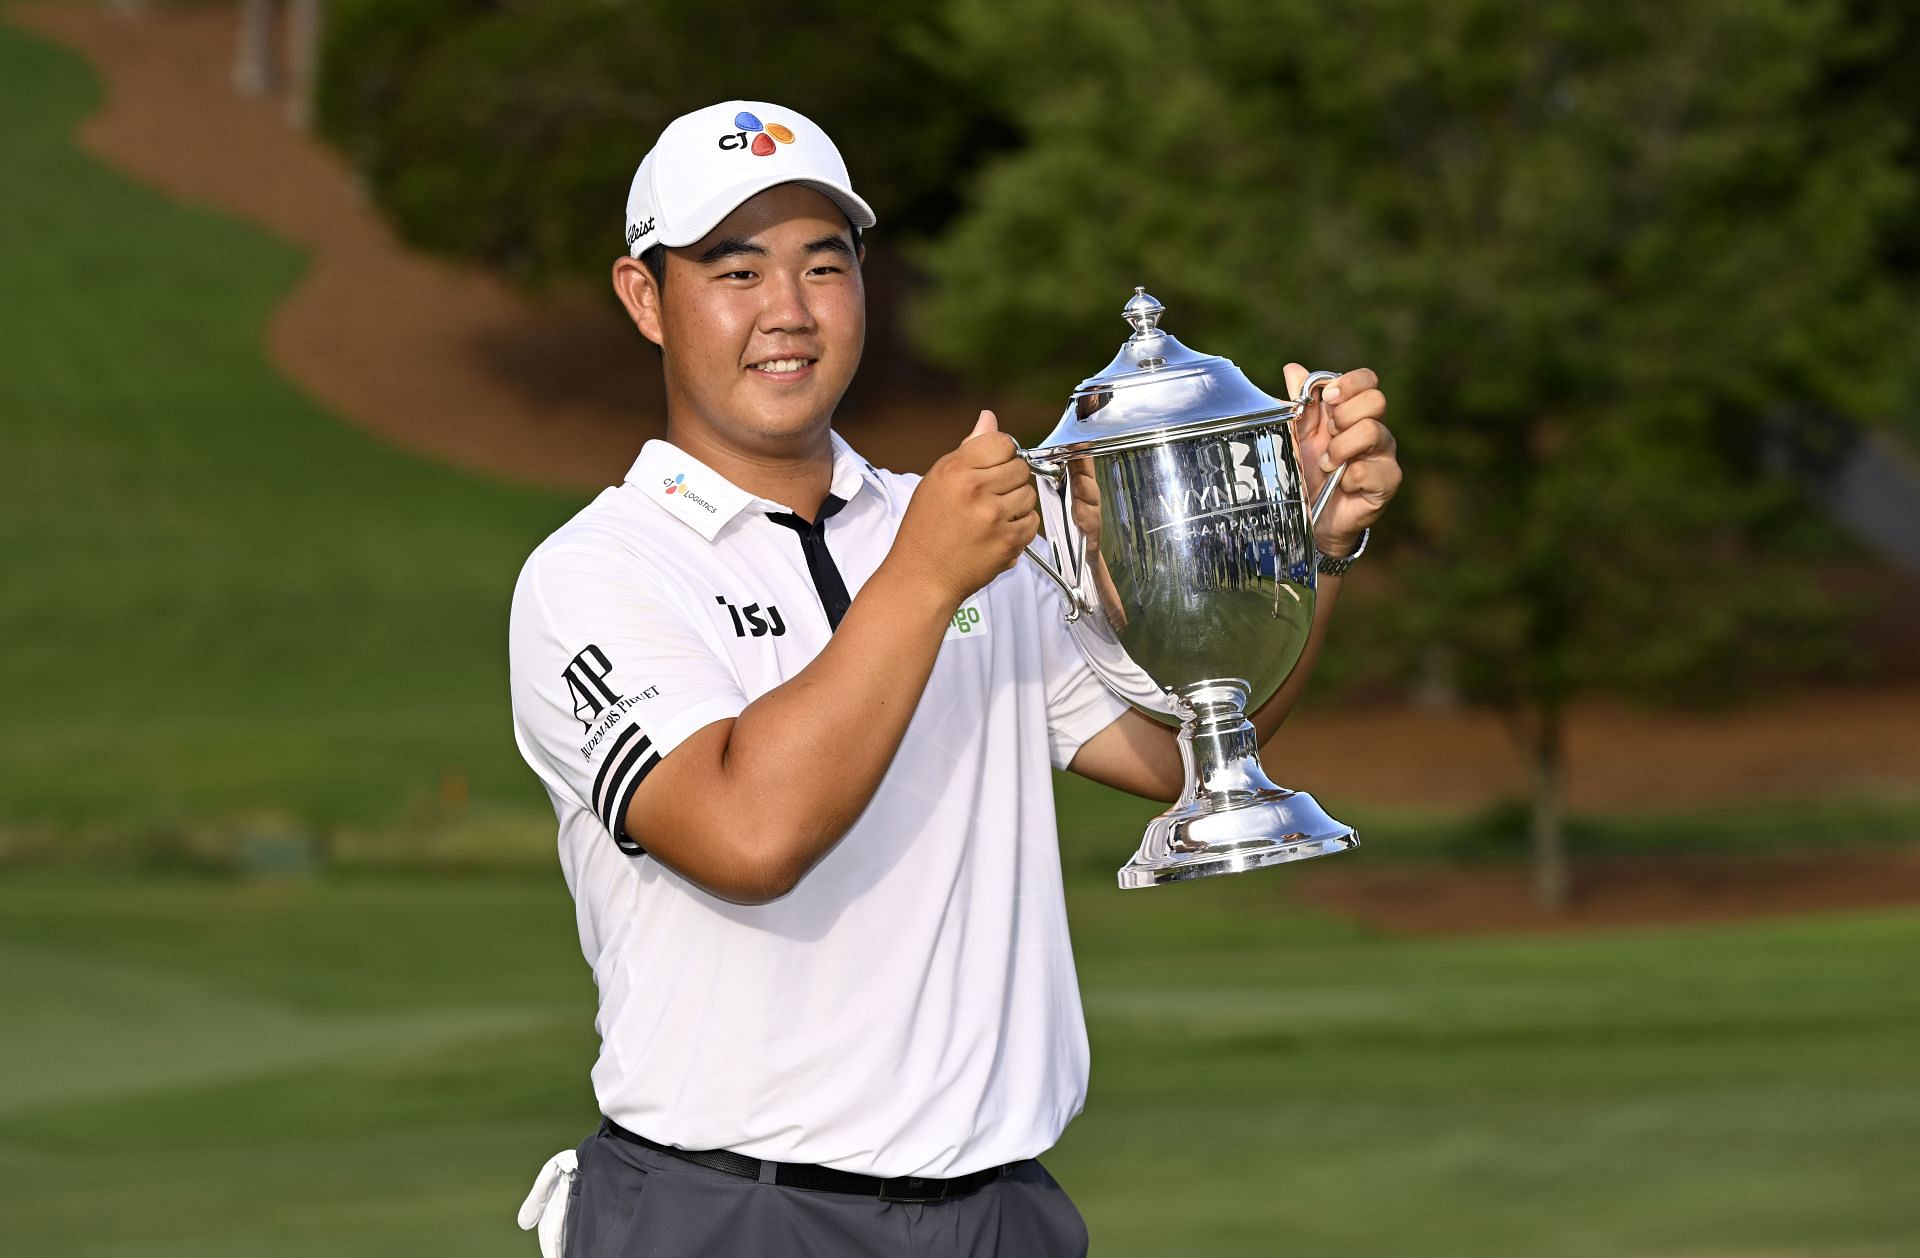 Tom Kim is the reigning champion at the Wyndham Championship